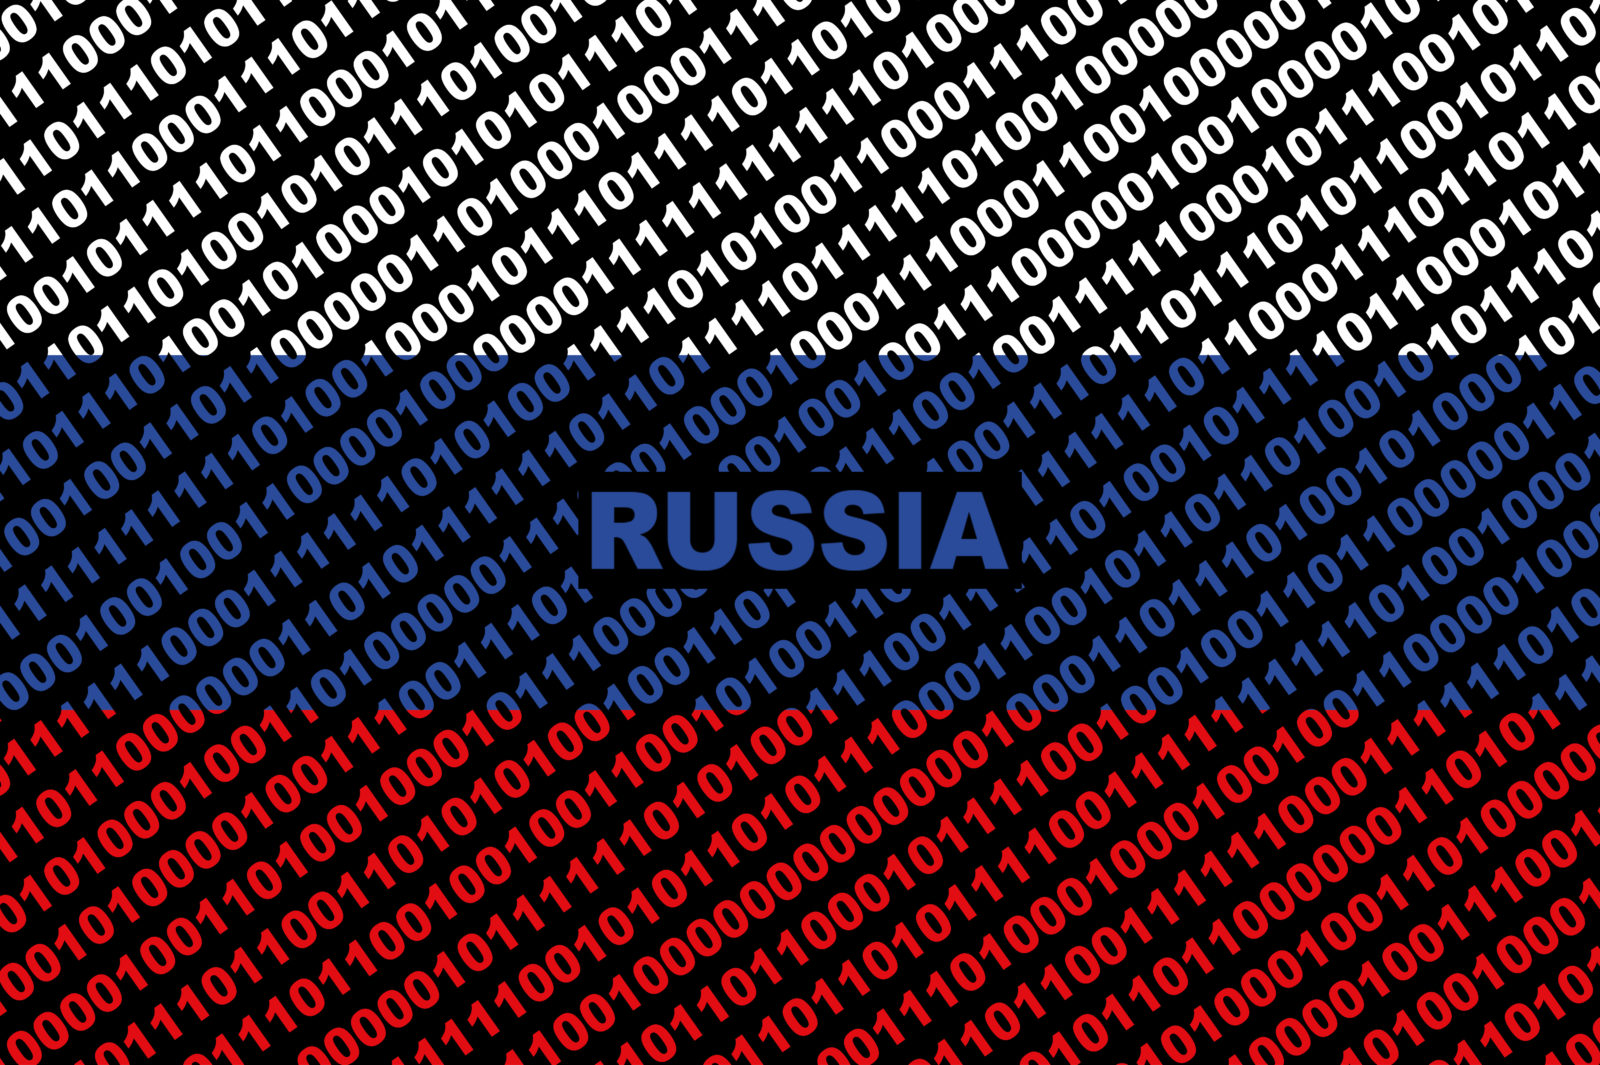 The 3 Most Common Ways Russian Hackers Gain Access and How to Protect From It